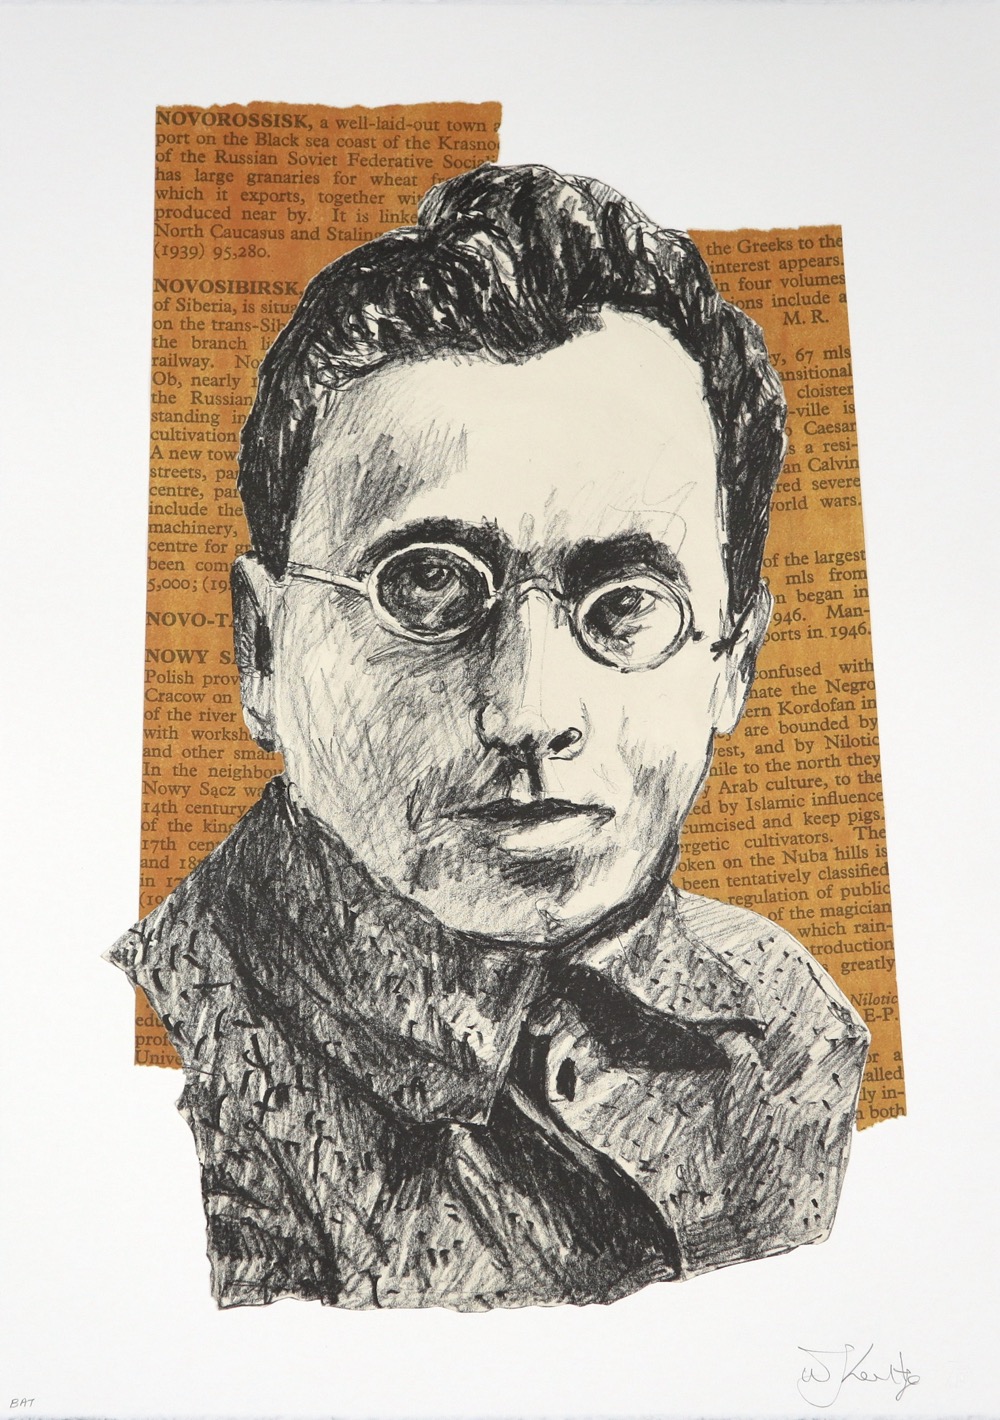 Portrait of a Soviet official by William Kentridge. Drawn in black of a man wearing glasses facing forward with torn orange strips of paper with text in the background